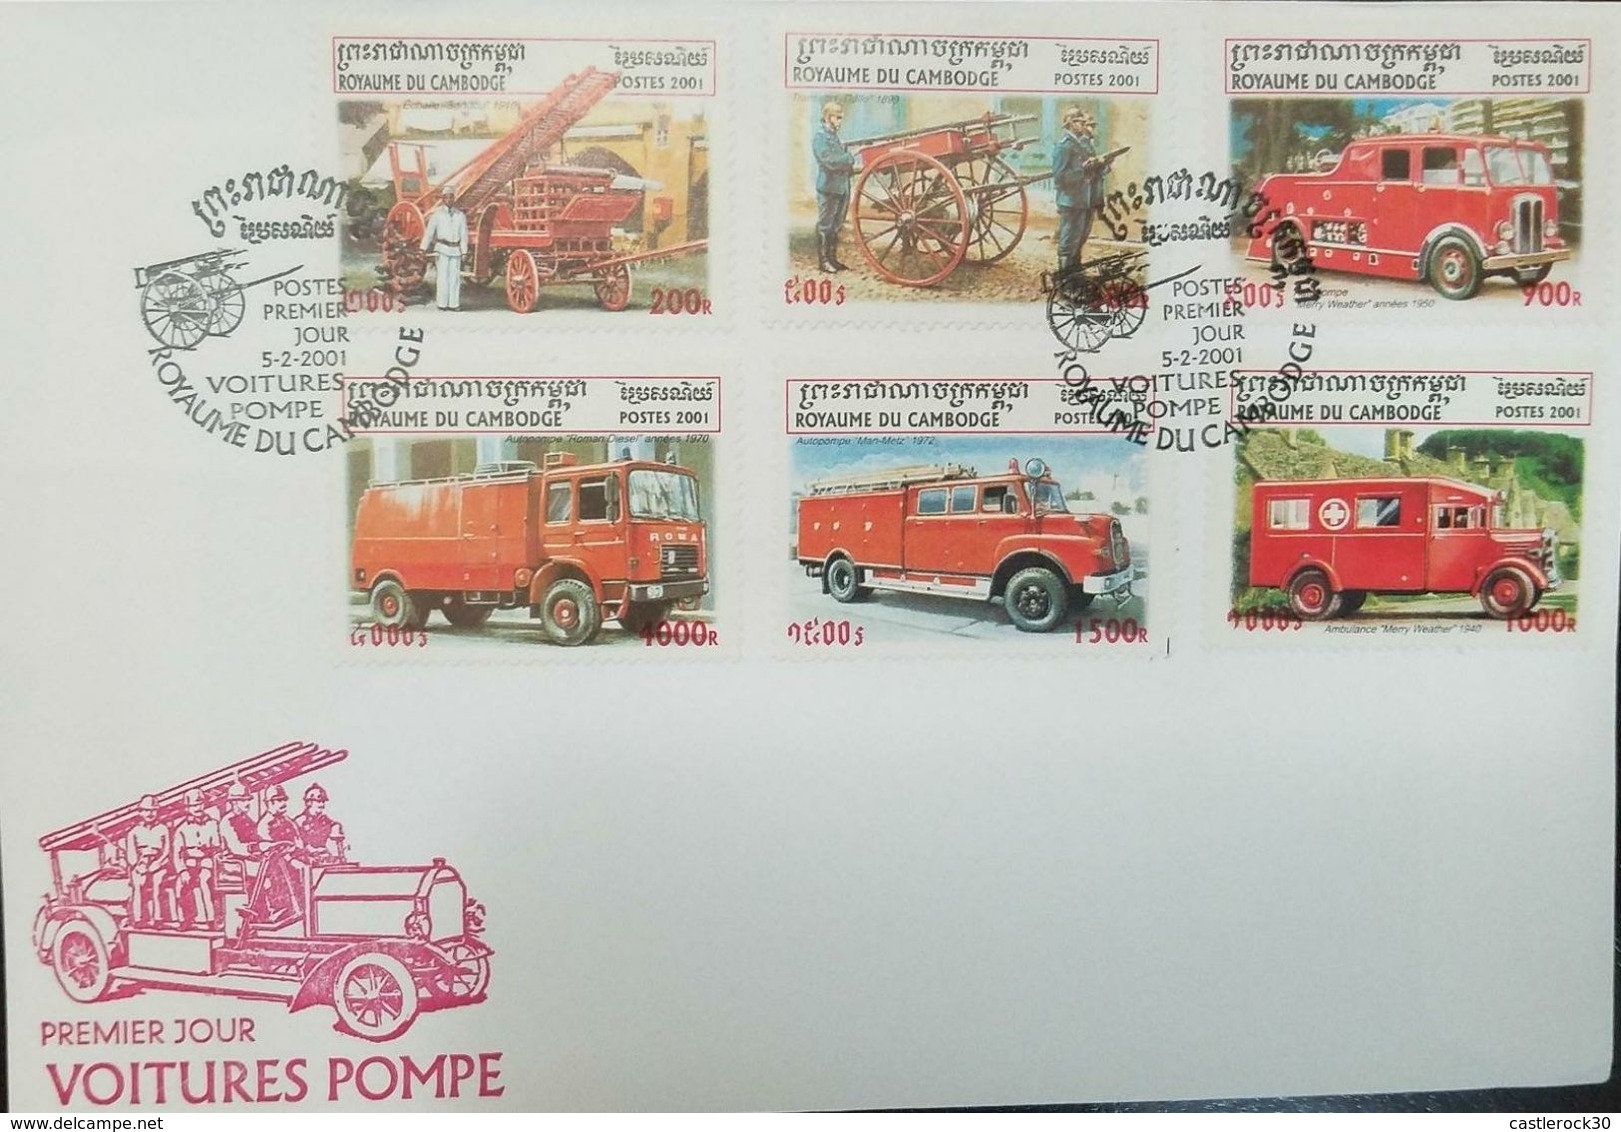 L) 2001 CAMBODIA, FIRE TRUCK, CAR COLLECTION, OLD CARS, MULTIPLE  STAMPS, RED, FDC - Cambodge